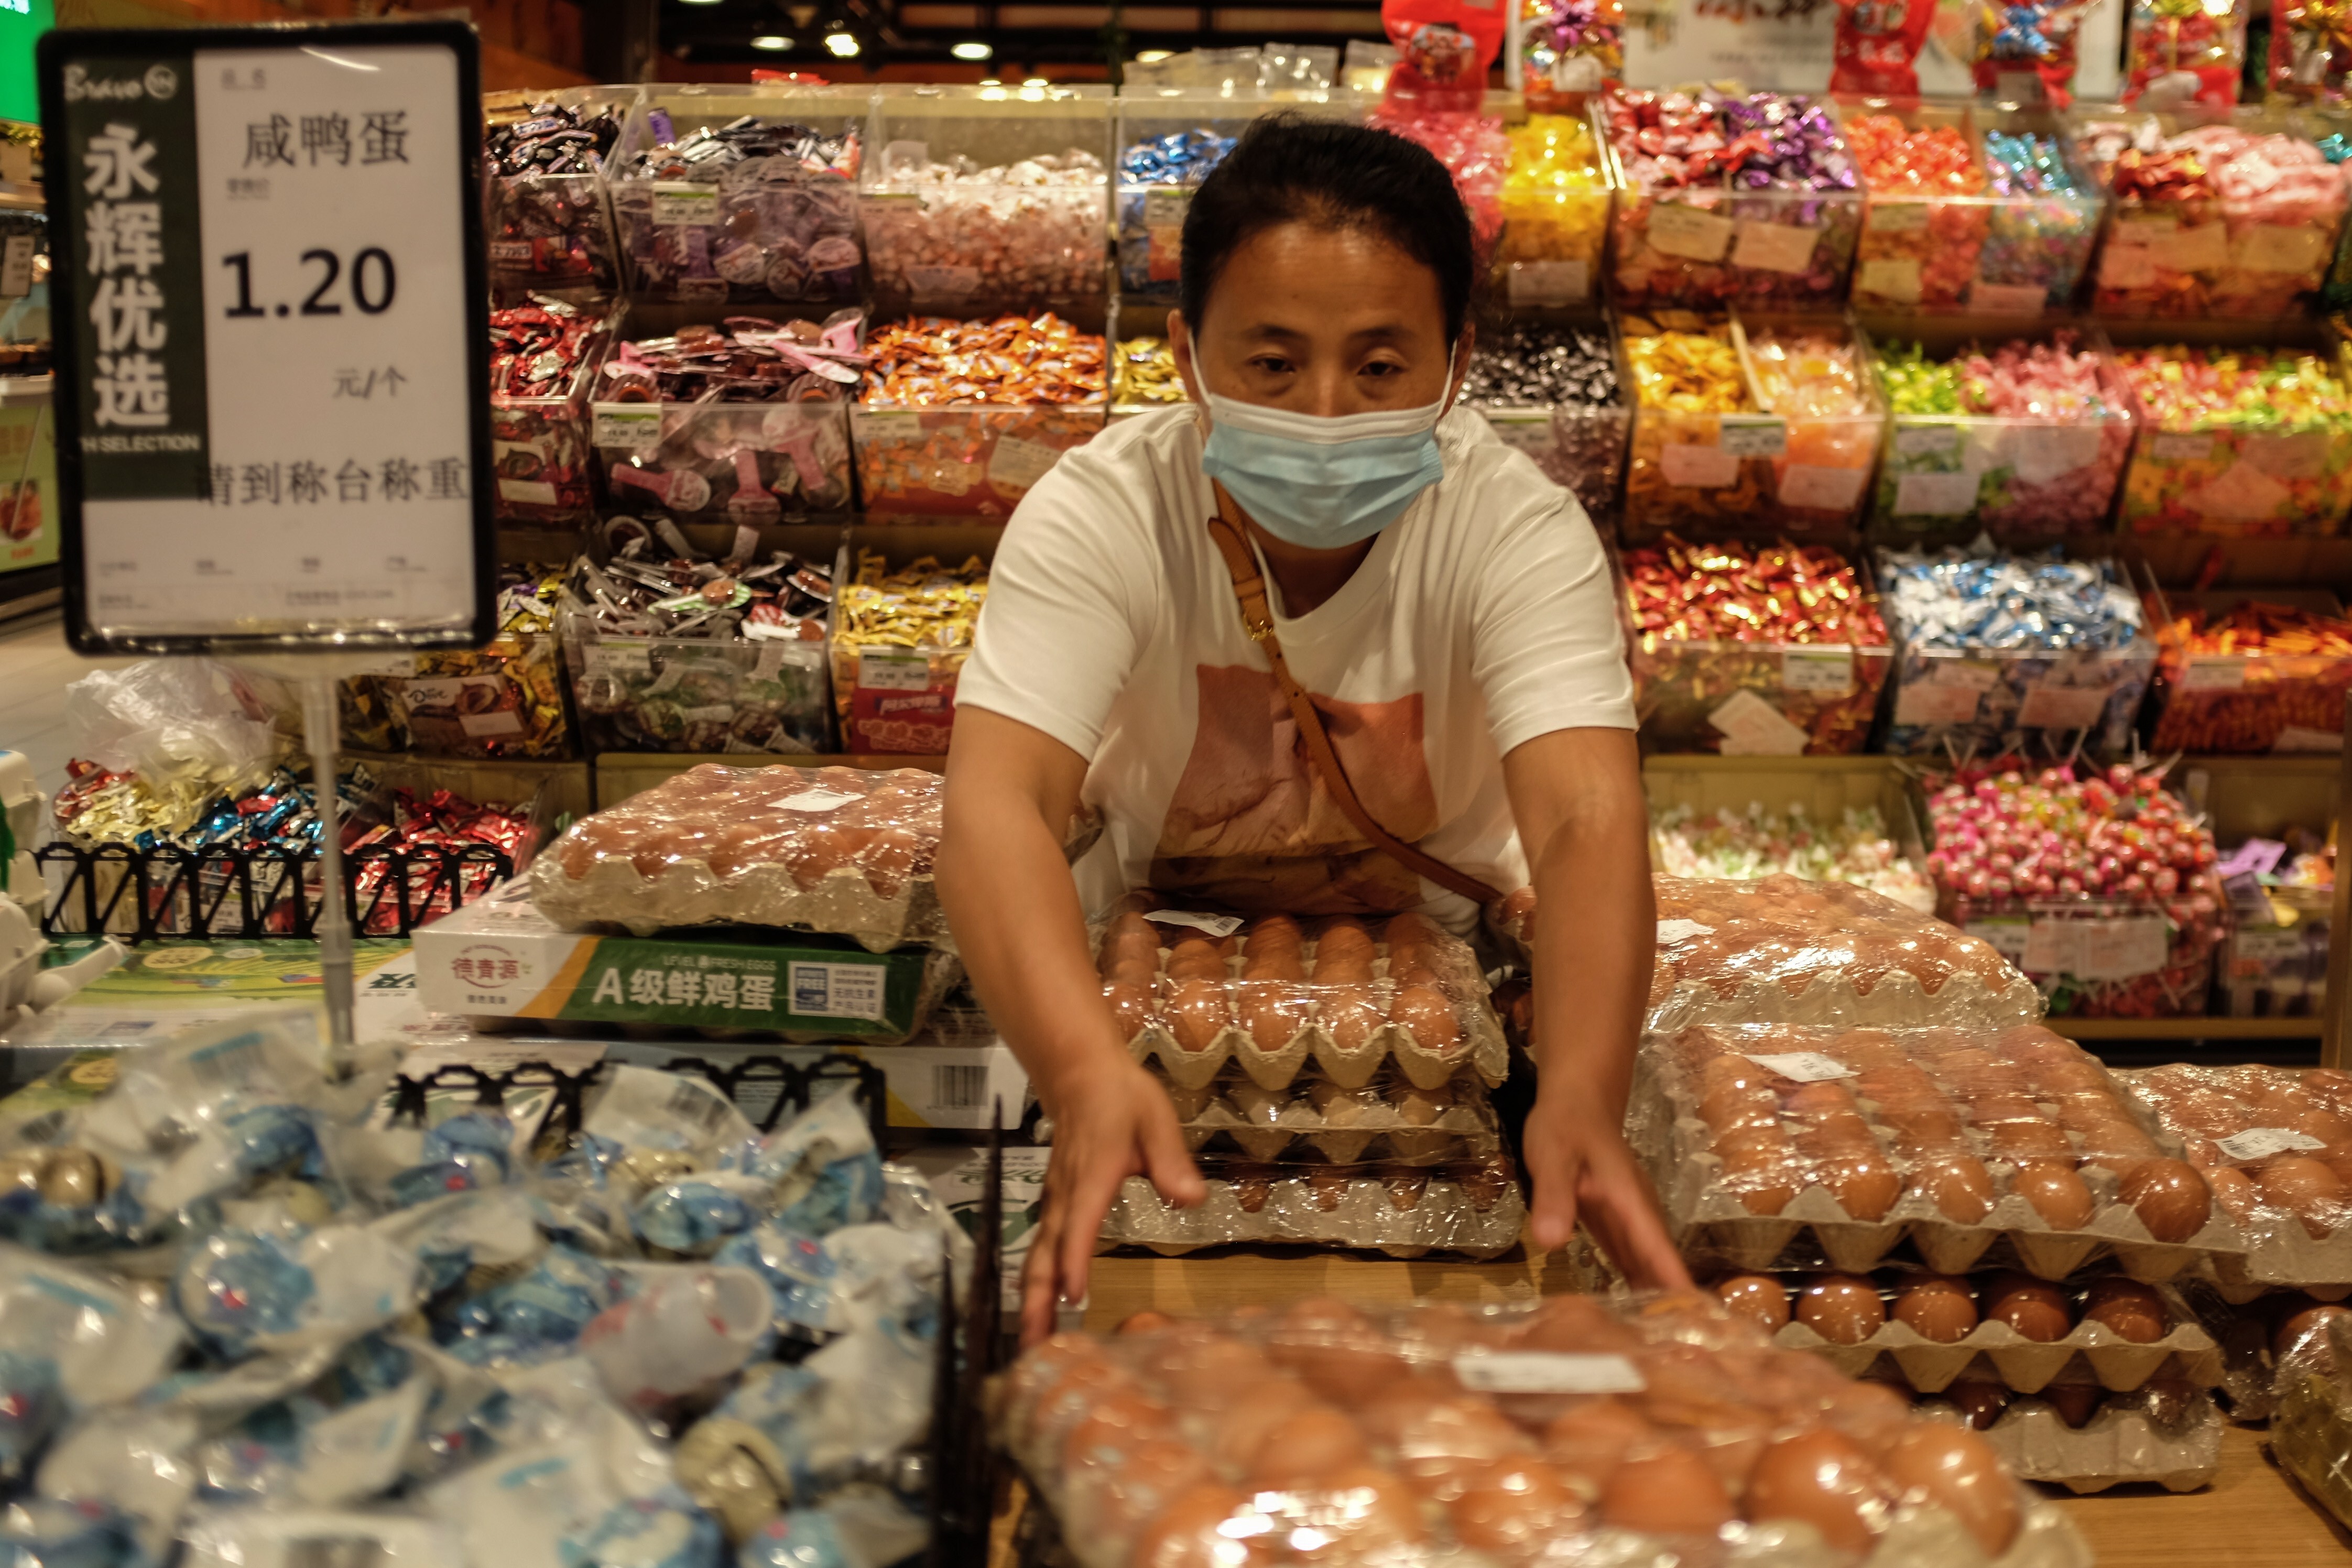 Plunging pork prices helped drive down the cost of food by 1.7 per cent in China last month. Photo: EPA-EFE